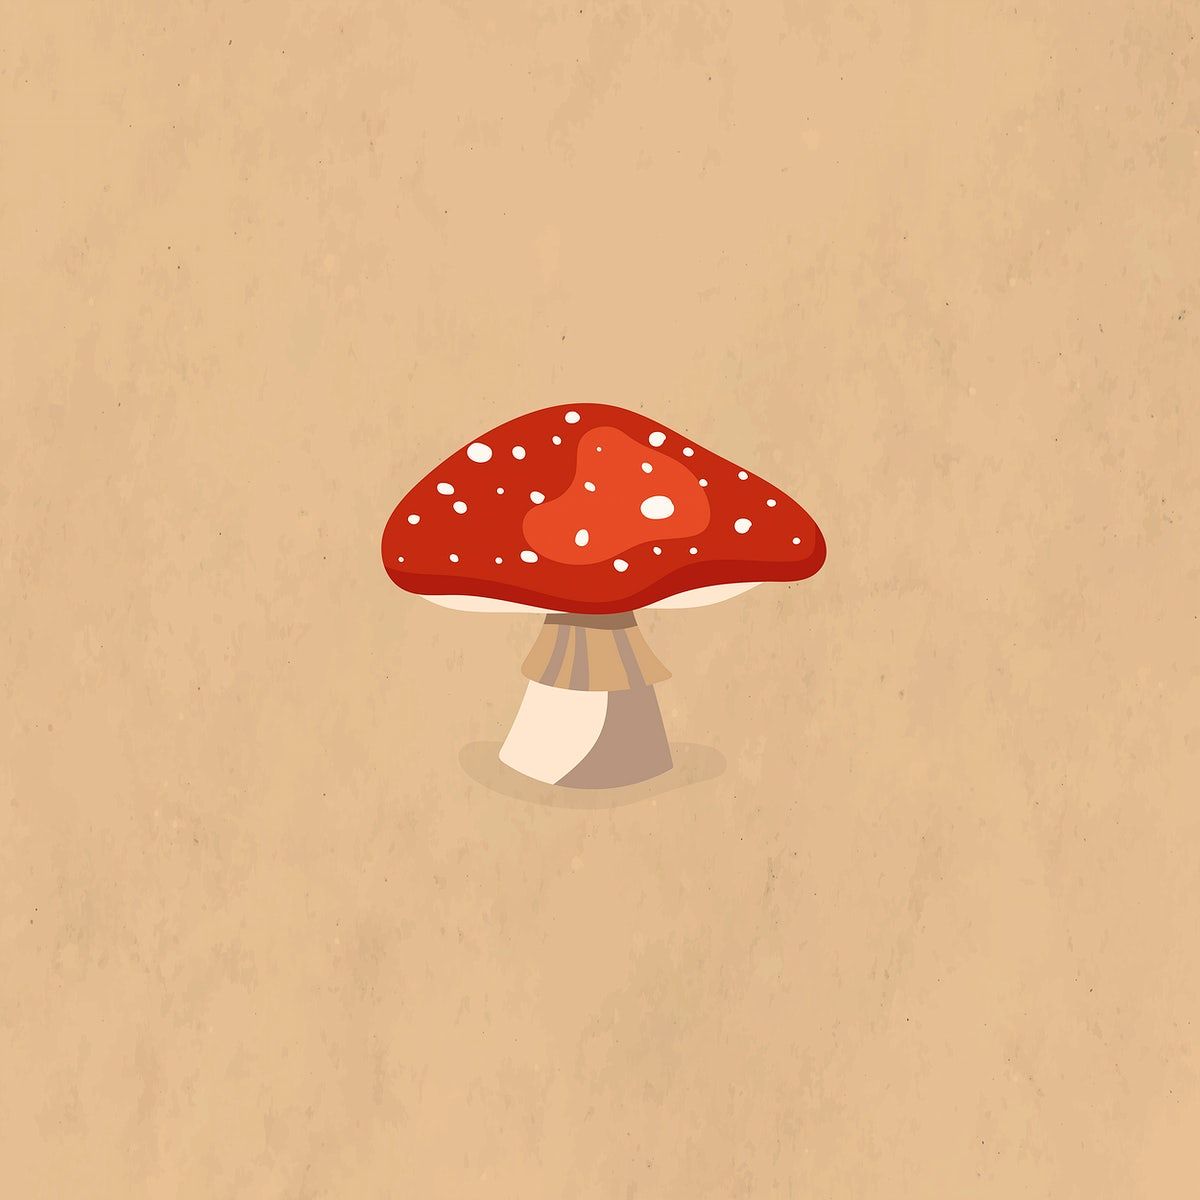 Download premium vector of Red mushroom autumn design element vector by Aew about toadstool, mushroom, red mushroom, toadstool mushroom, and poison 1202871